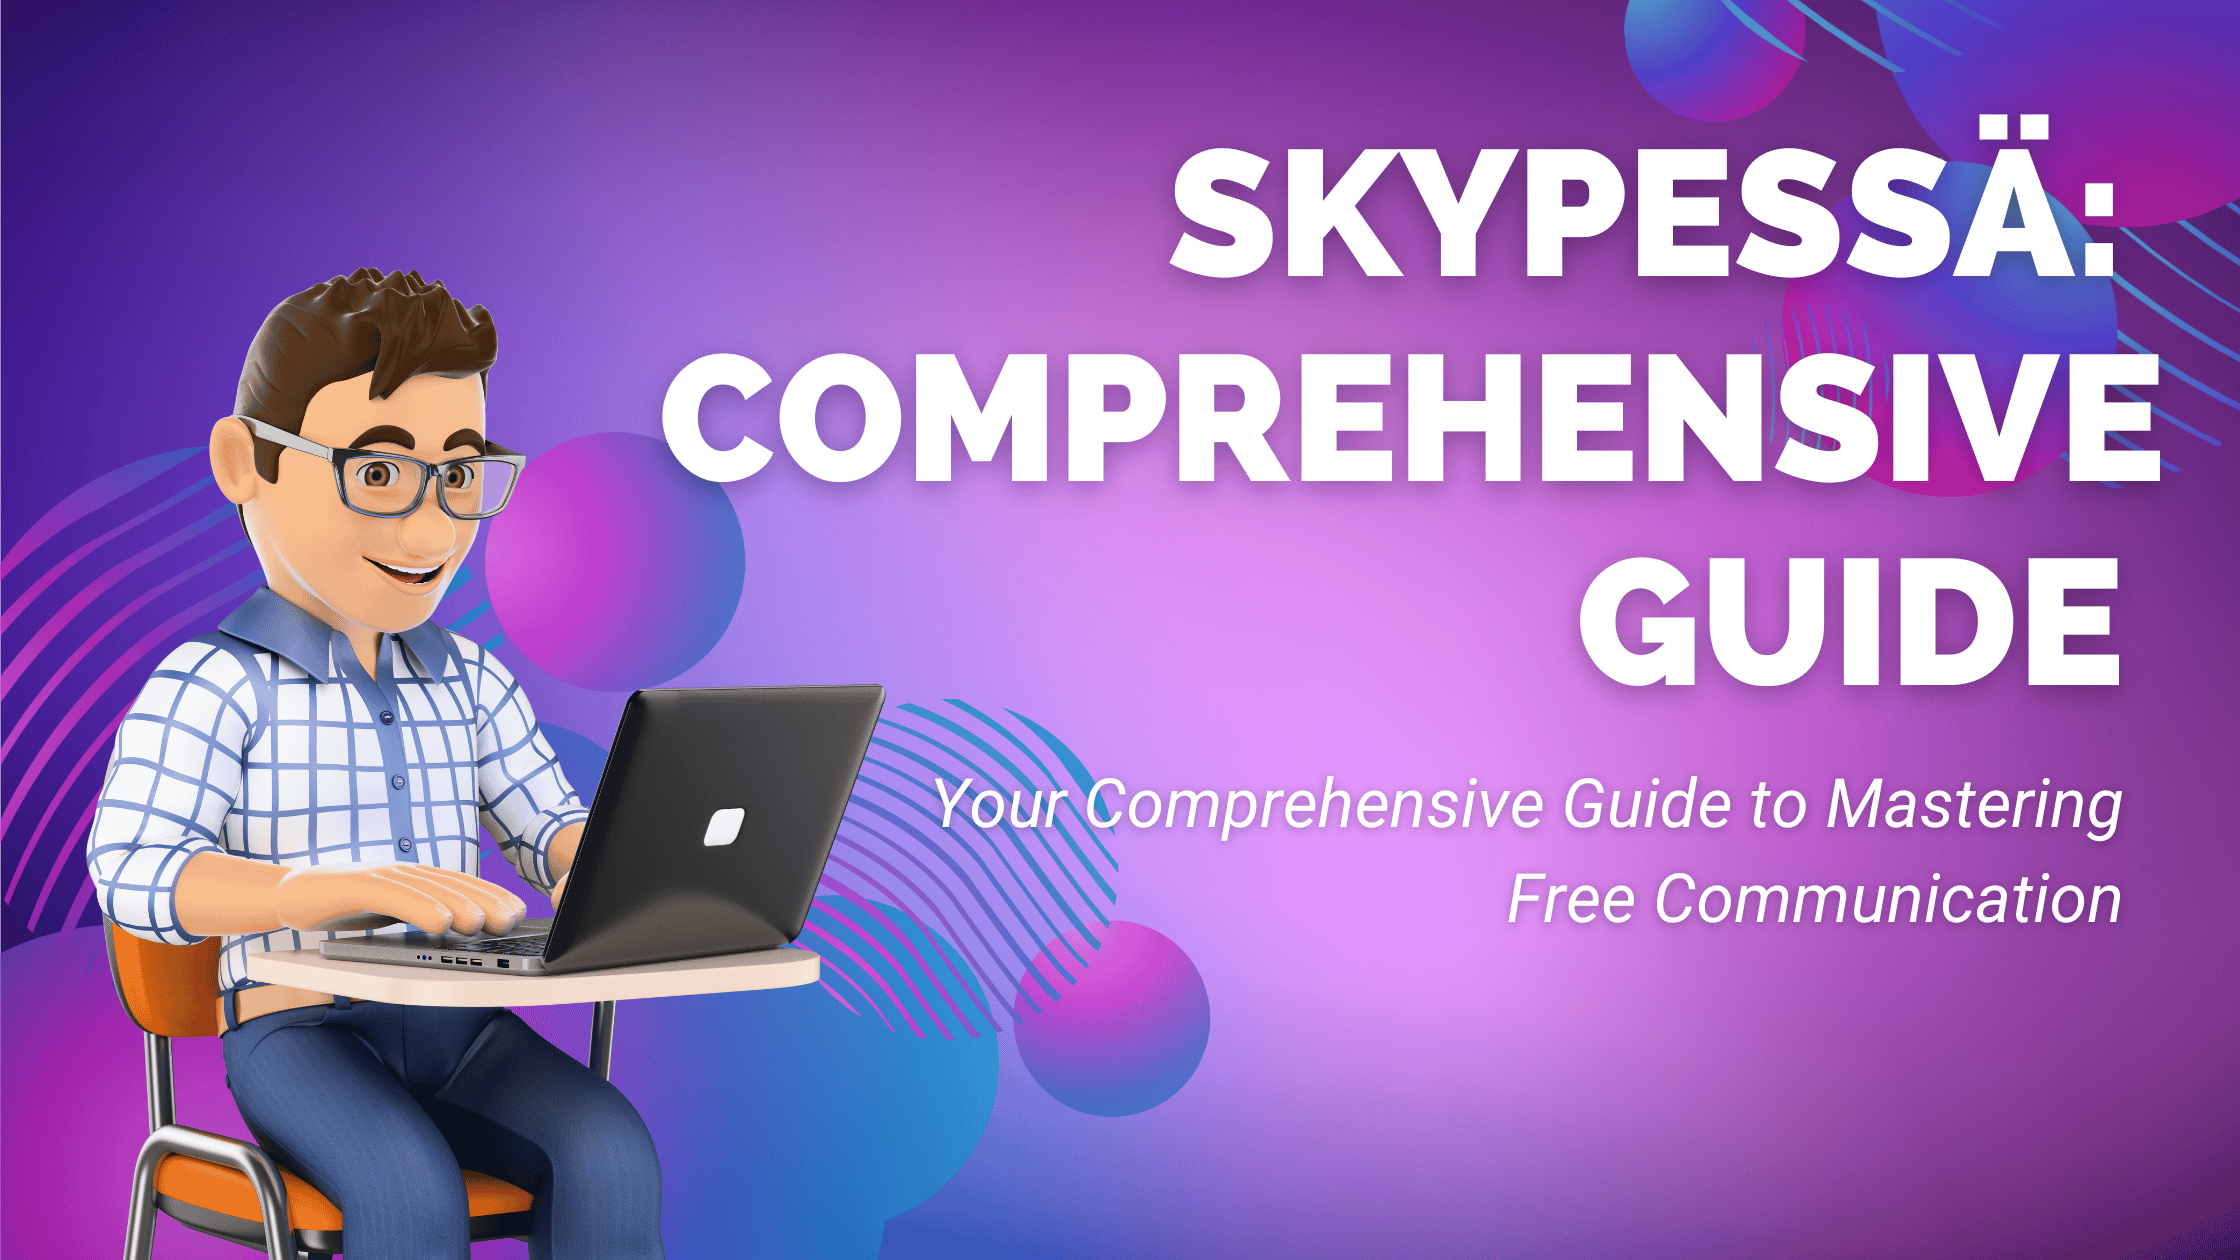 Skypessä: Your Comprehensive Guide to Mastering Free Communication